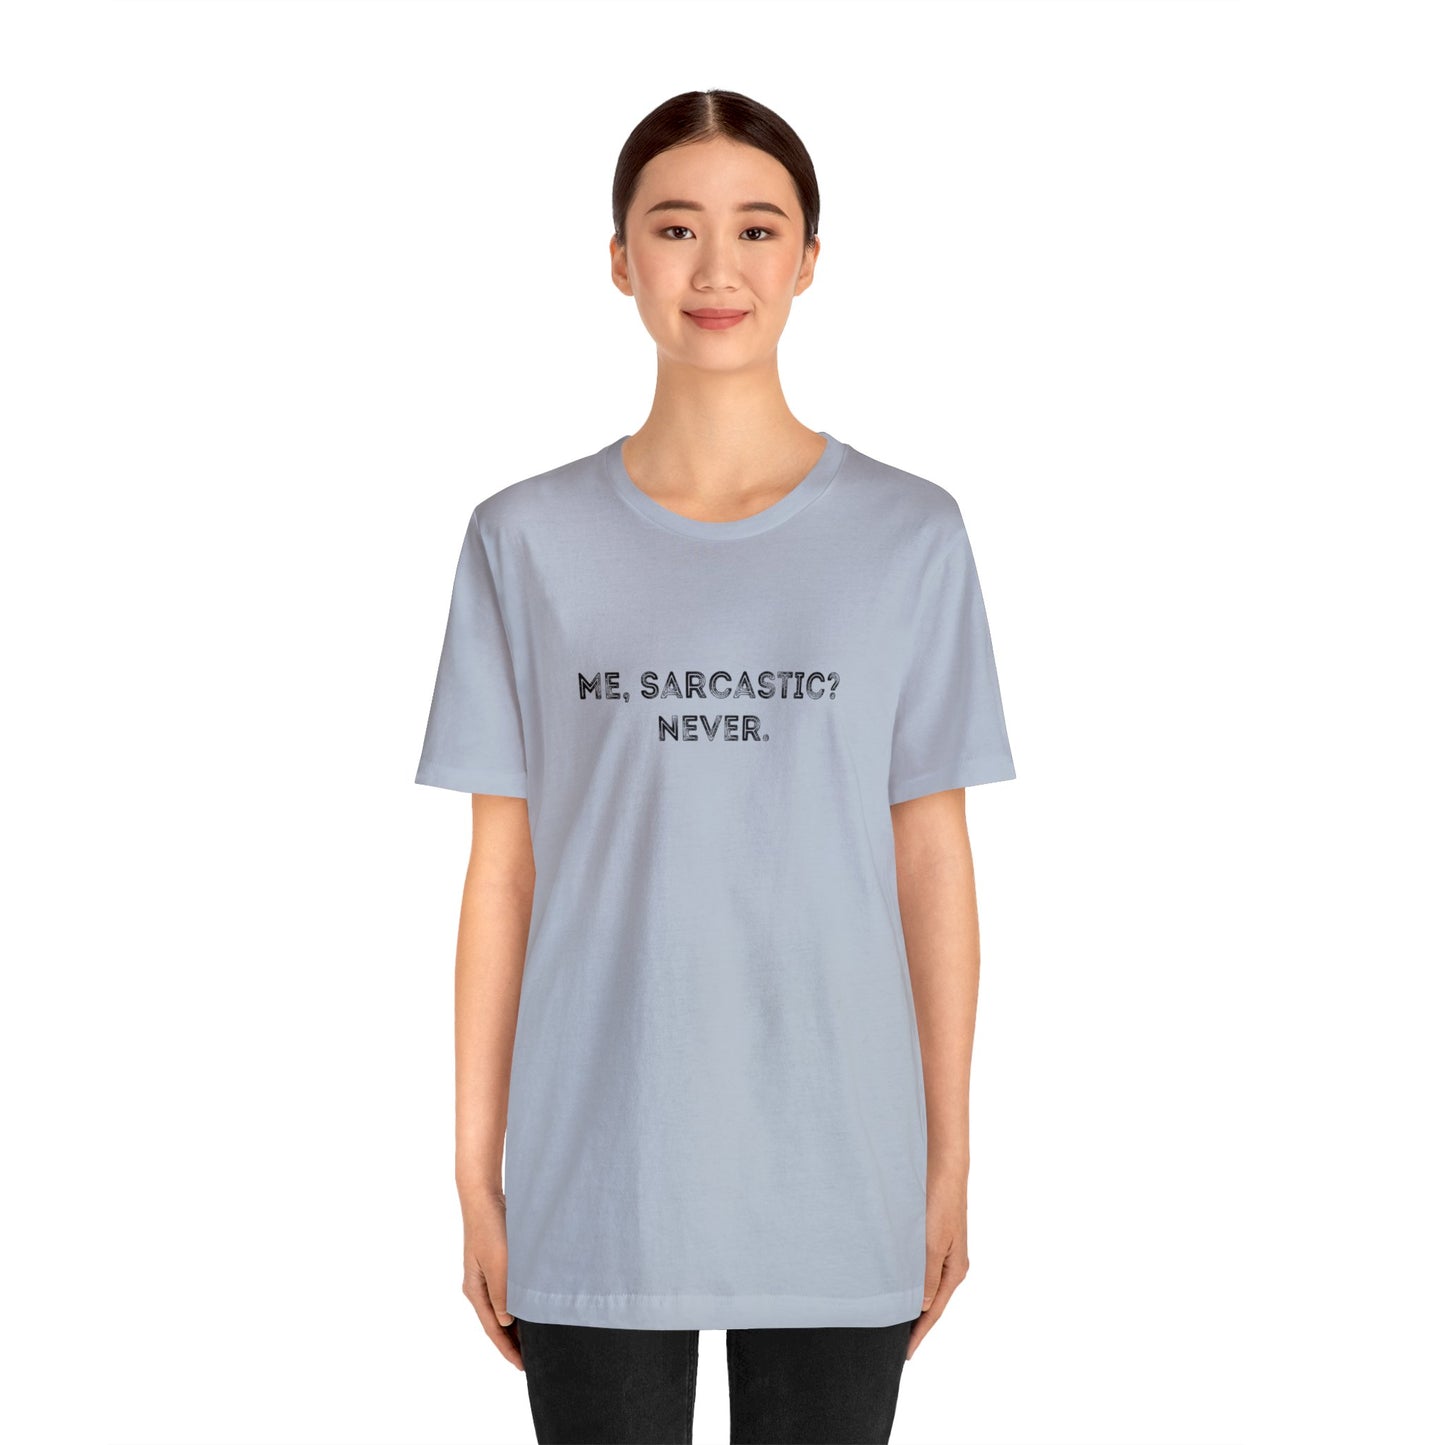 Sarcastic quote t-shirt // Fun and trendy tee for sarcastic friend